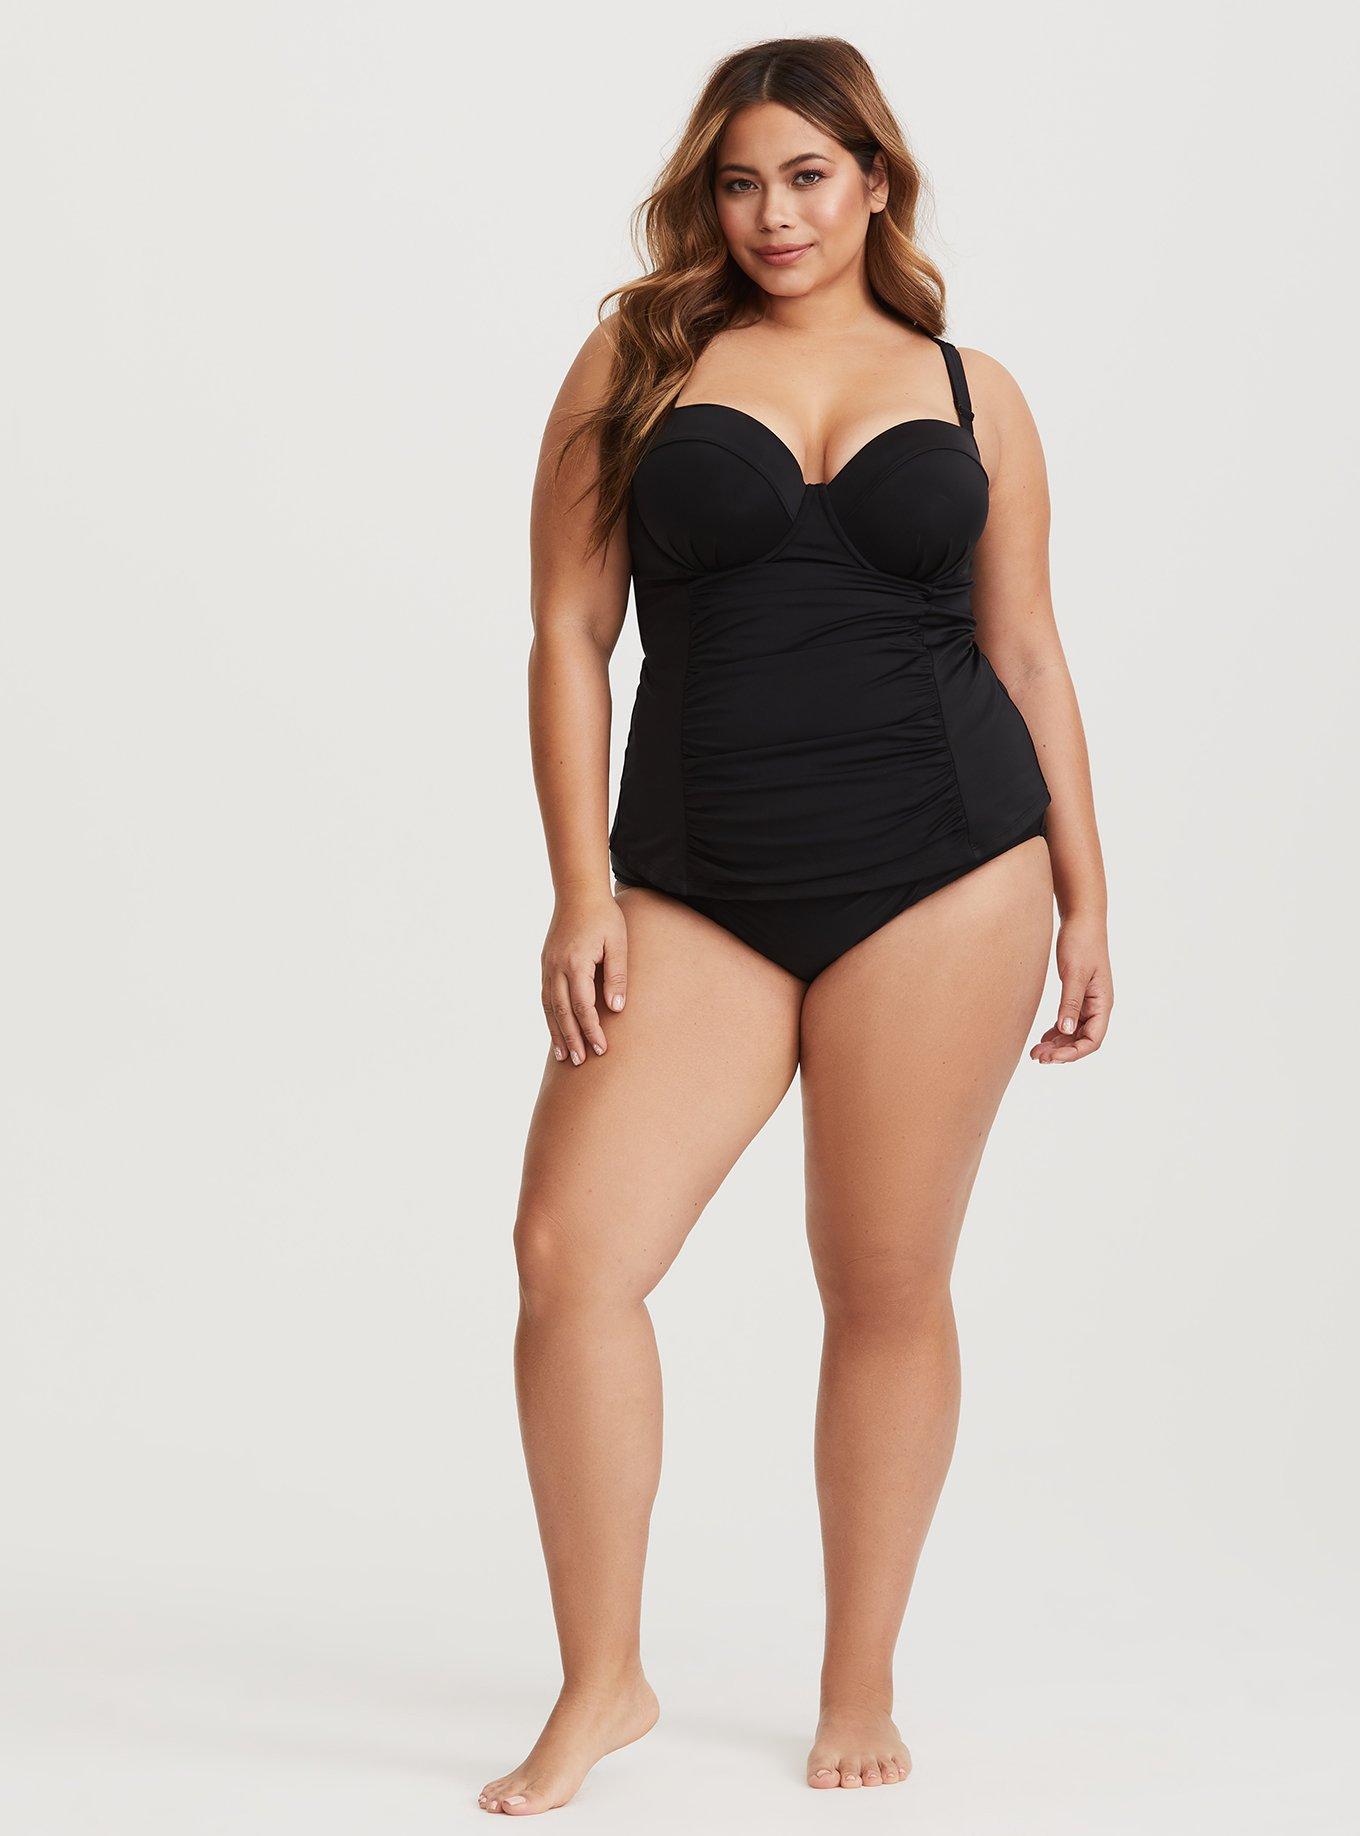 NWT TORRID ONLINE EXCLUSIVE SIZE 4X (26) BLACK MESH STRAPPY